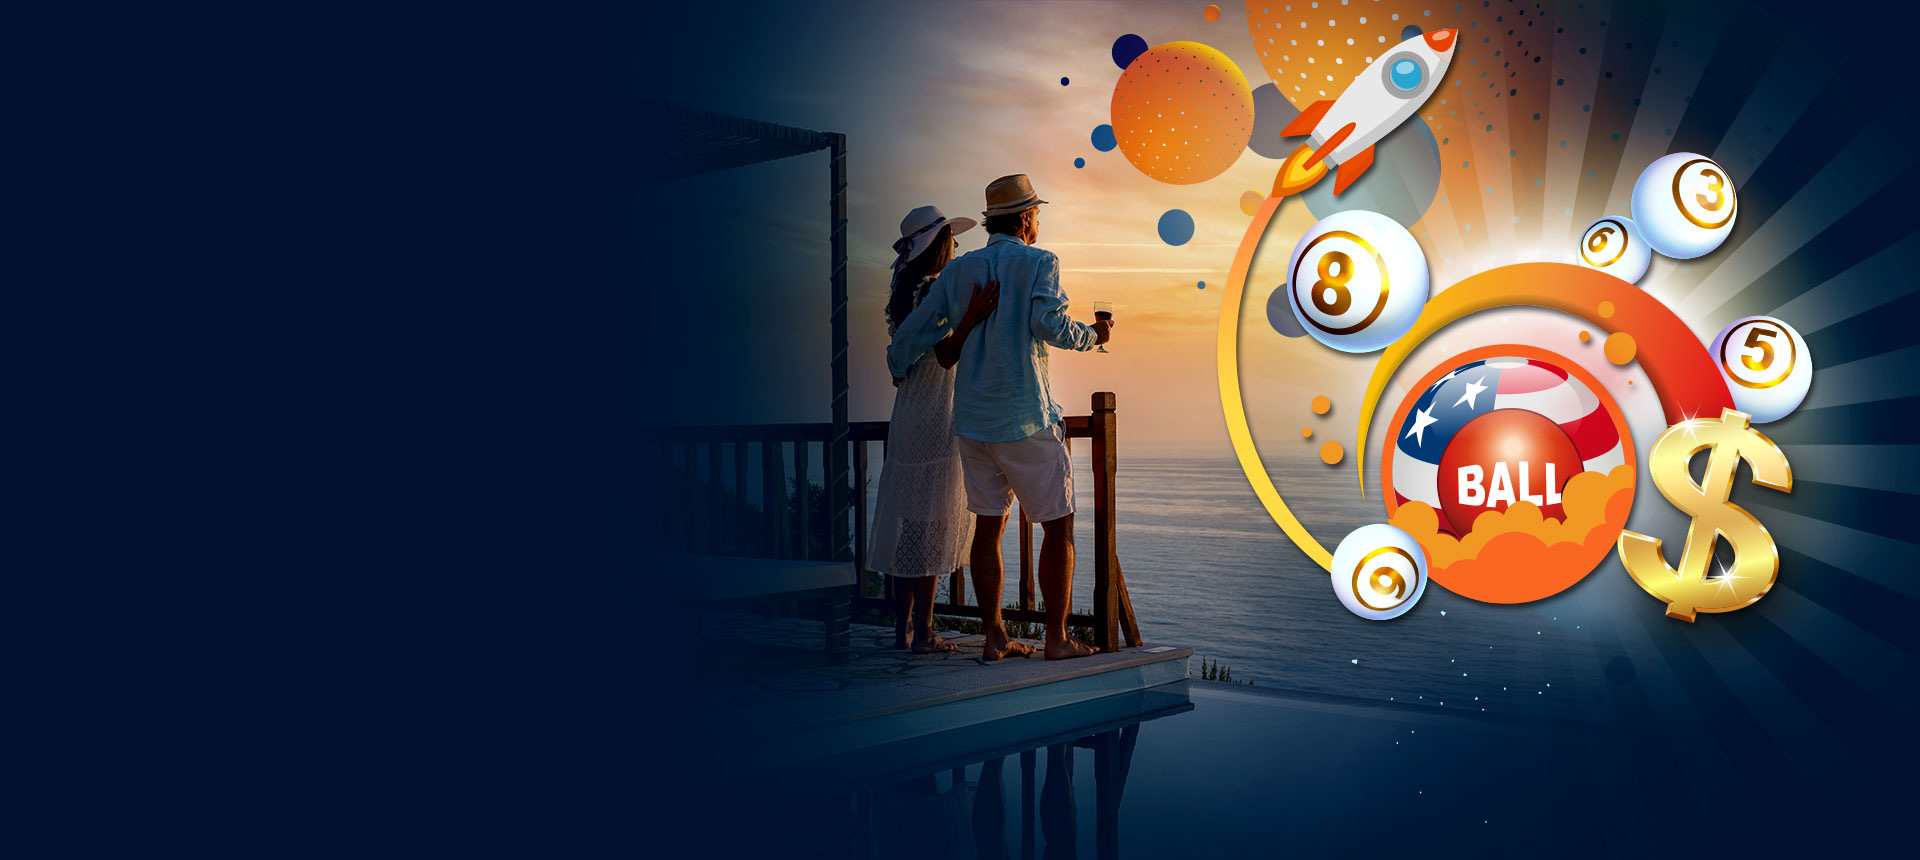 At Wintrillions you can boost your jackpot today up to $300 million!